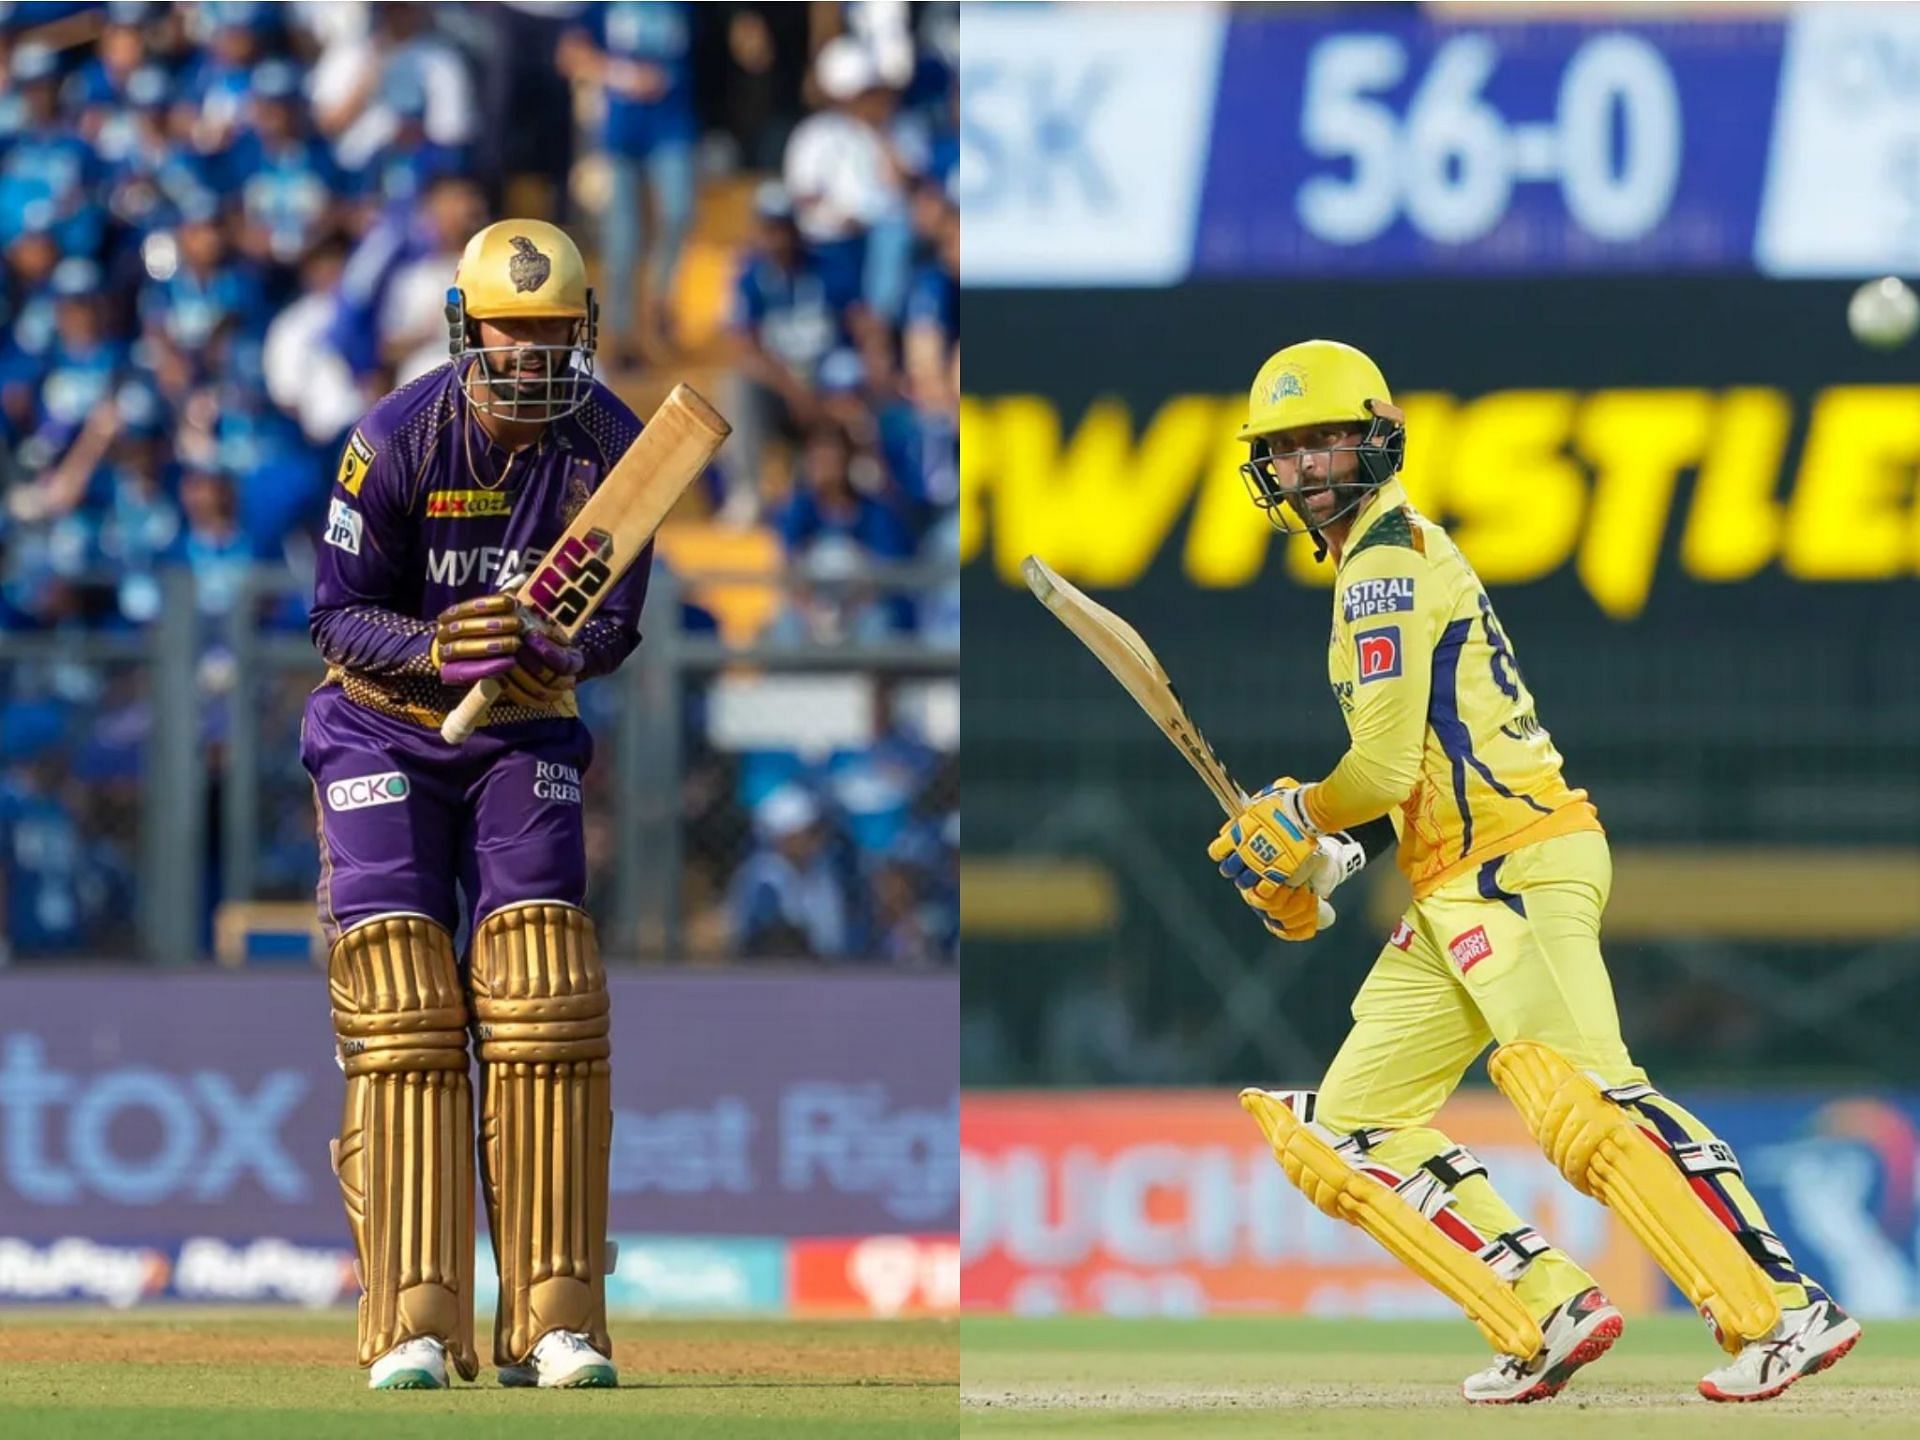 There were some immaculate batting performances in Week 3 of the ongoing IPL